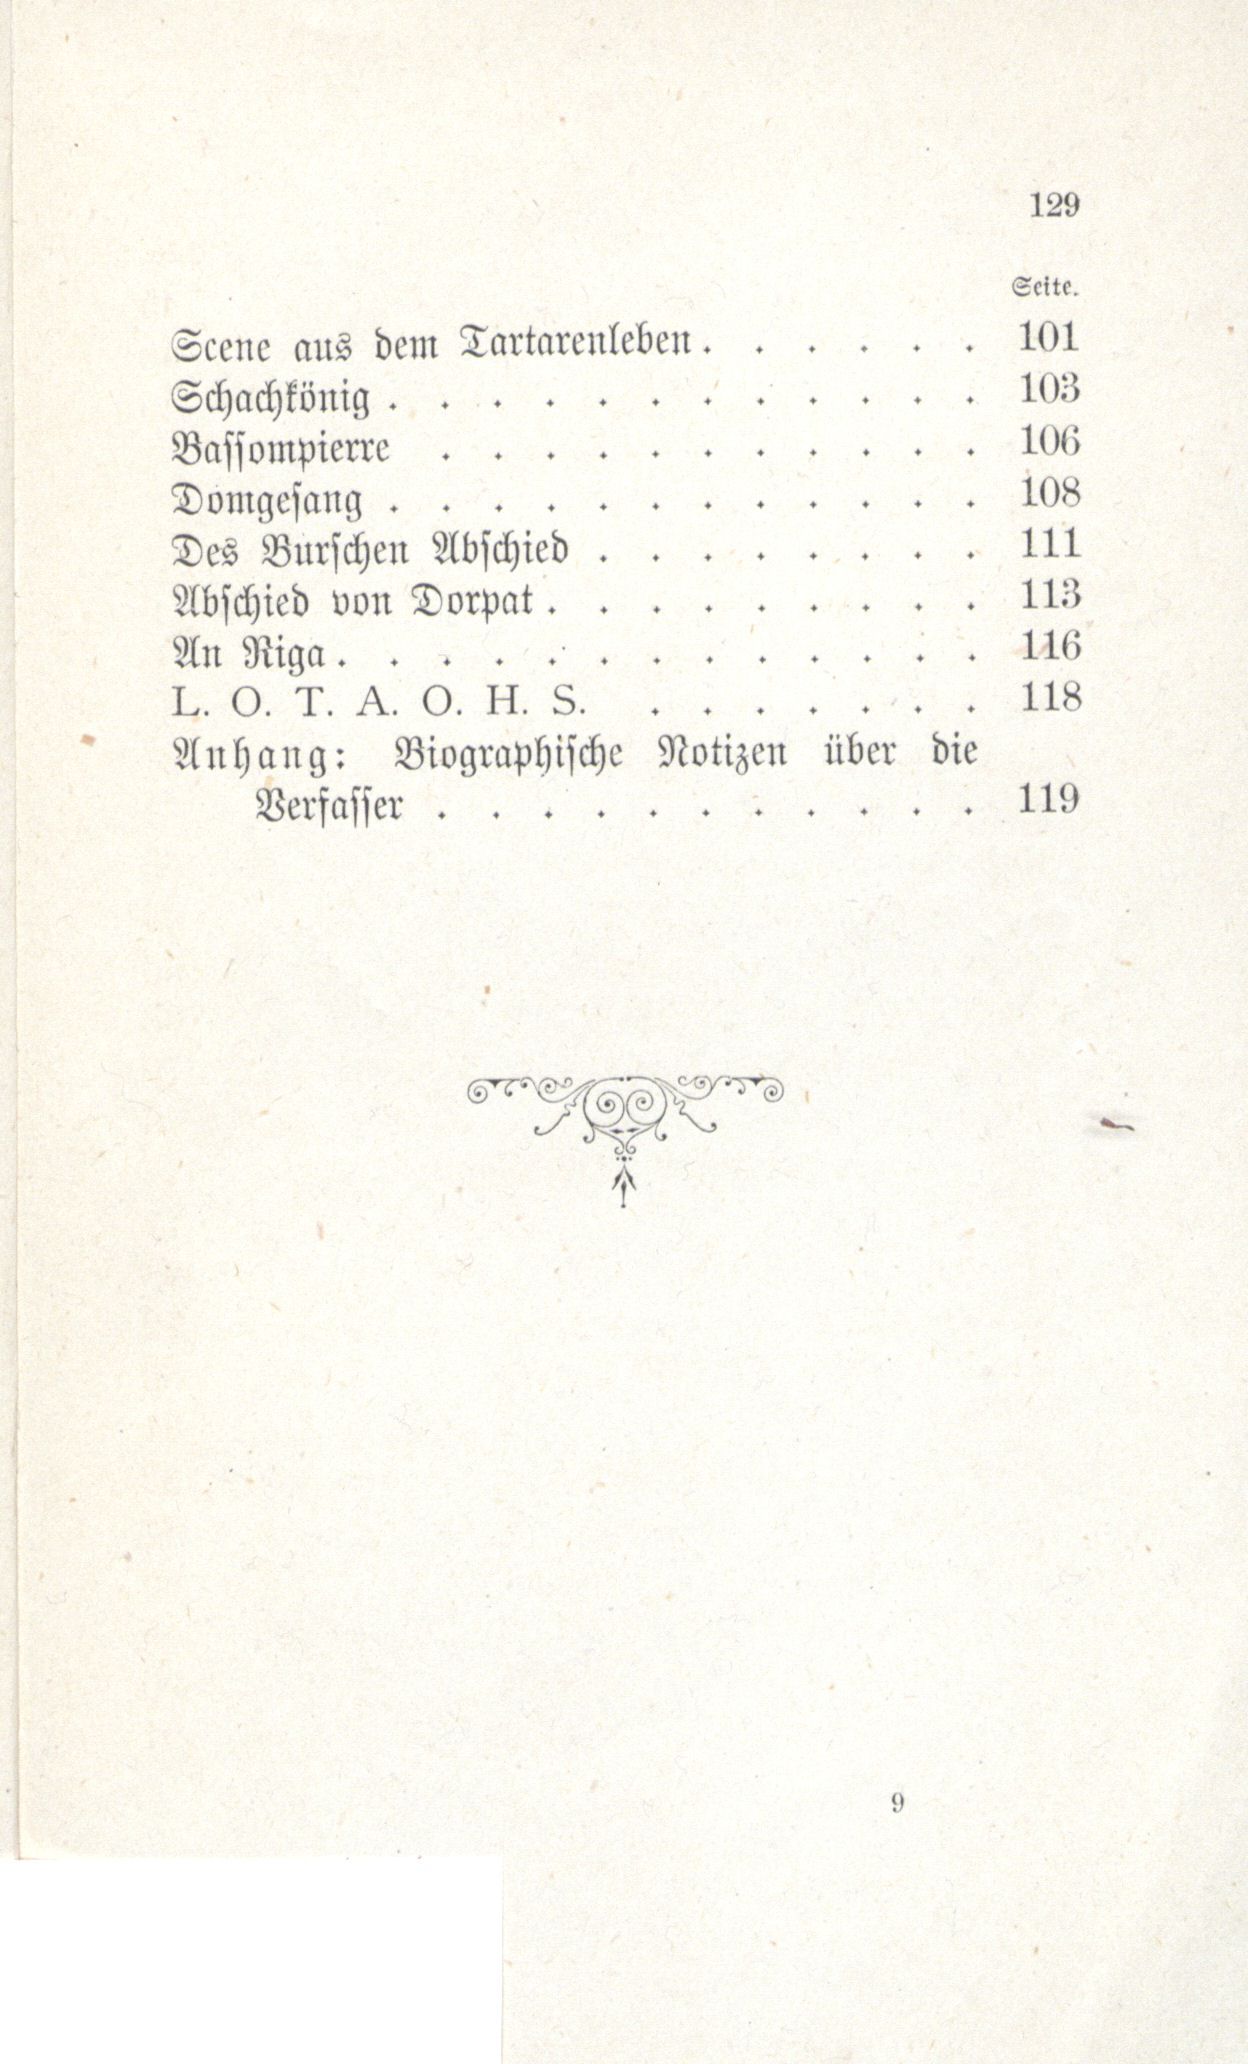 Erinnerung an die Fraternitas (1880) | 129. (129) Table of contents